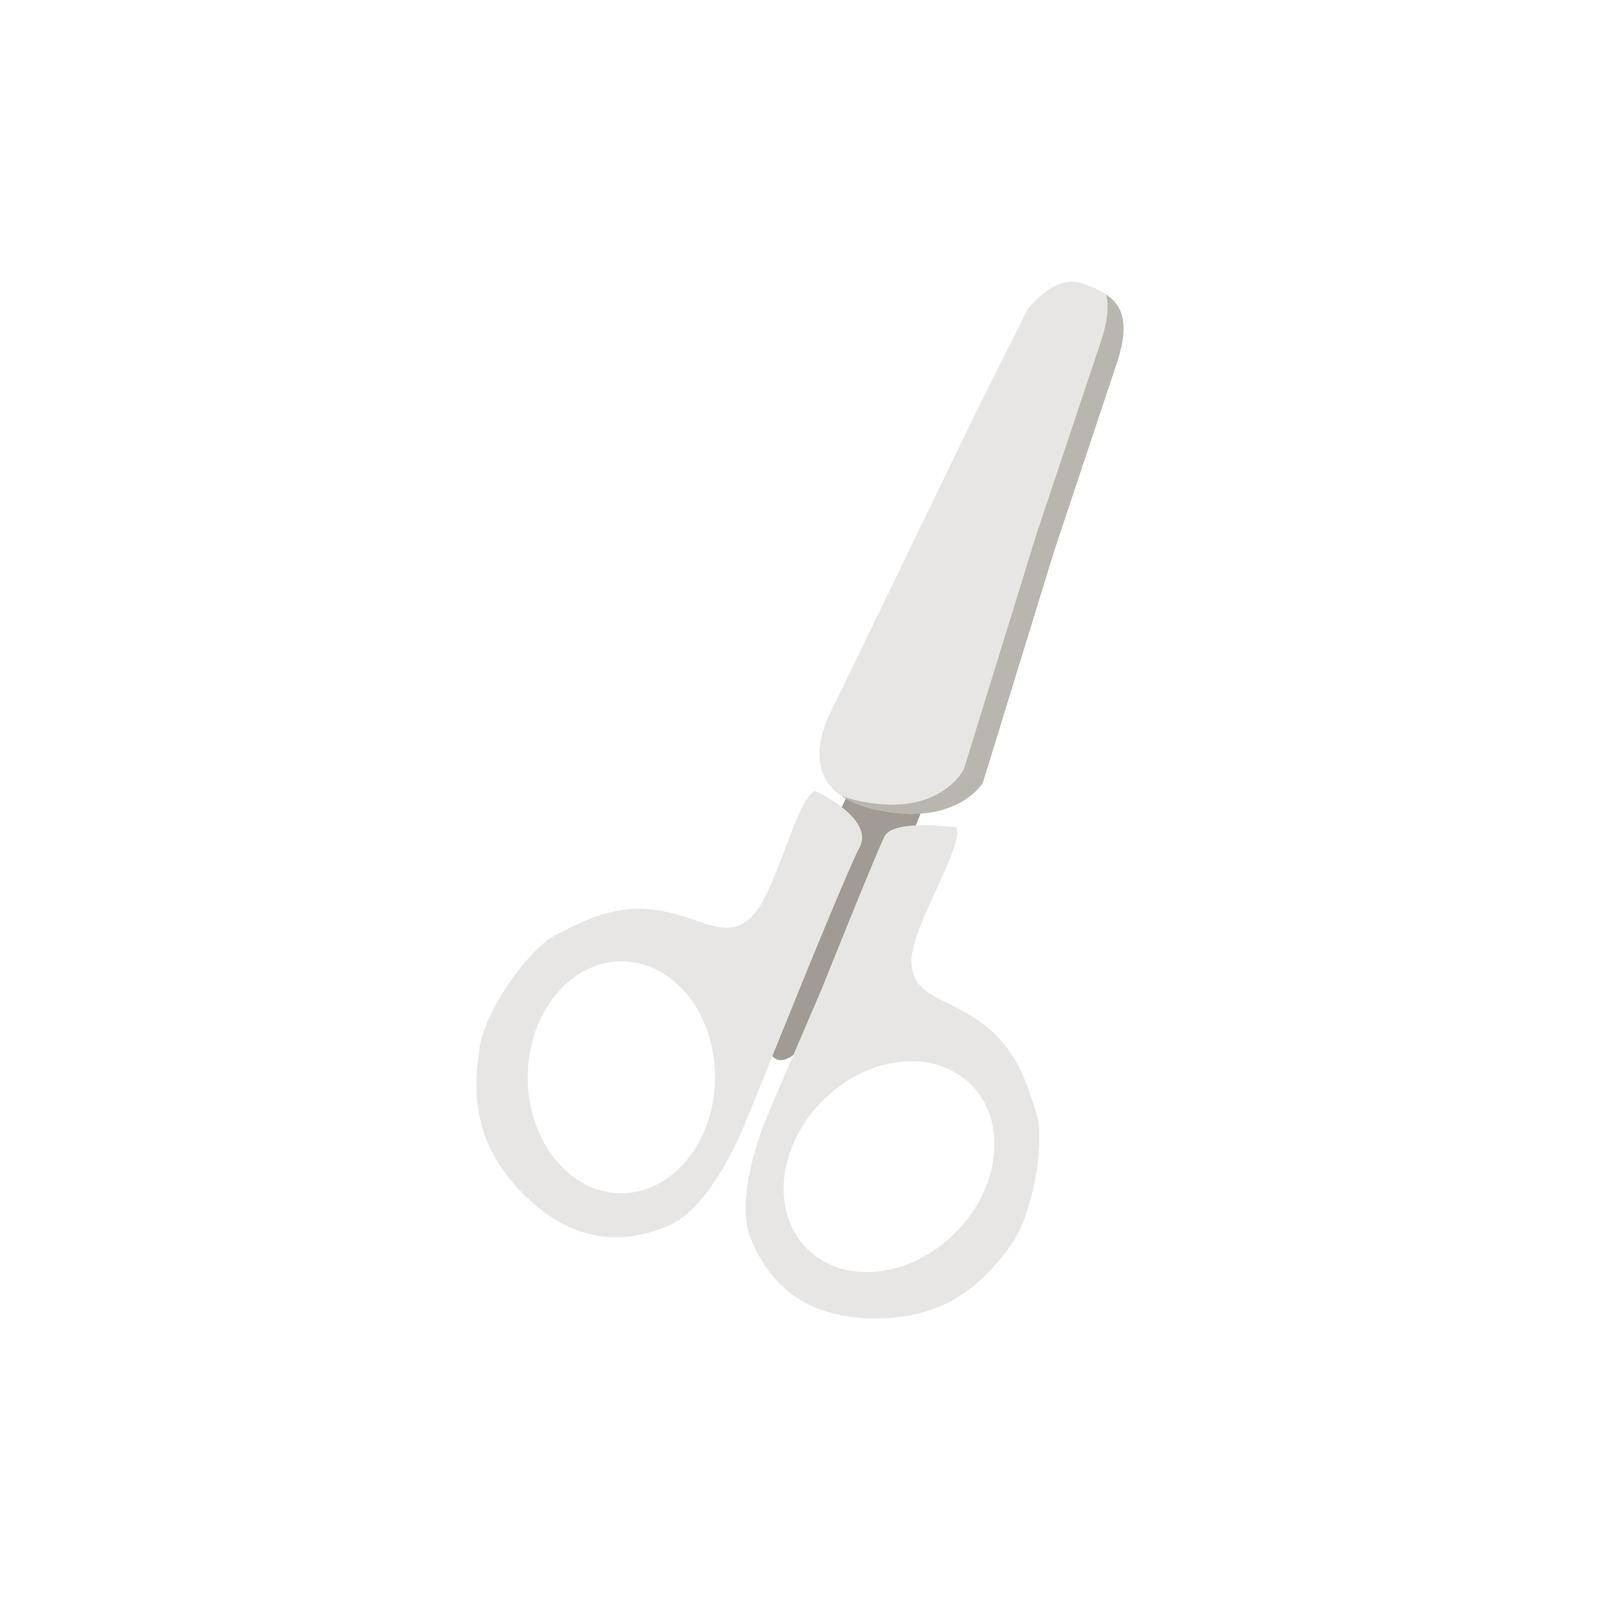 Scissors icon in flat style for web and creative design. Vector illustration. Isolated on white